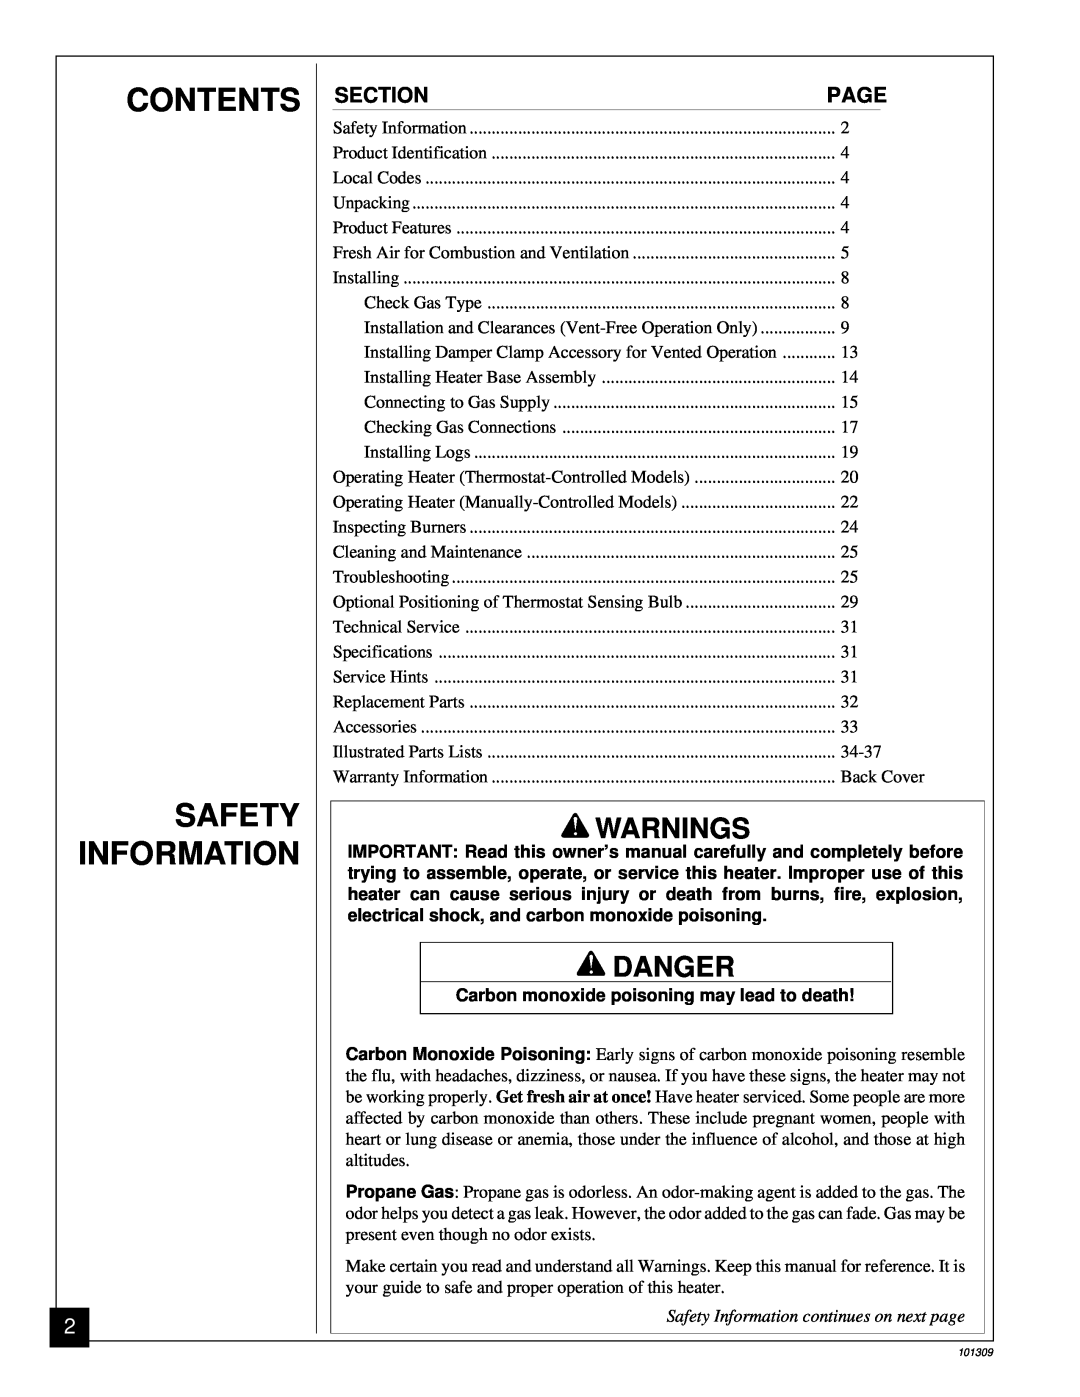 Desa UNVENTED (VENT-FREE) PROPANE GAS LOG HEATER installation manual Contents Safety Information, Warnings, Danger 